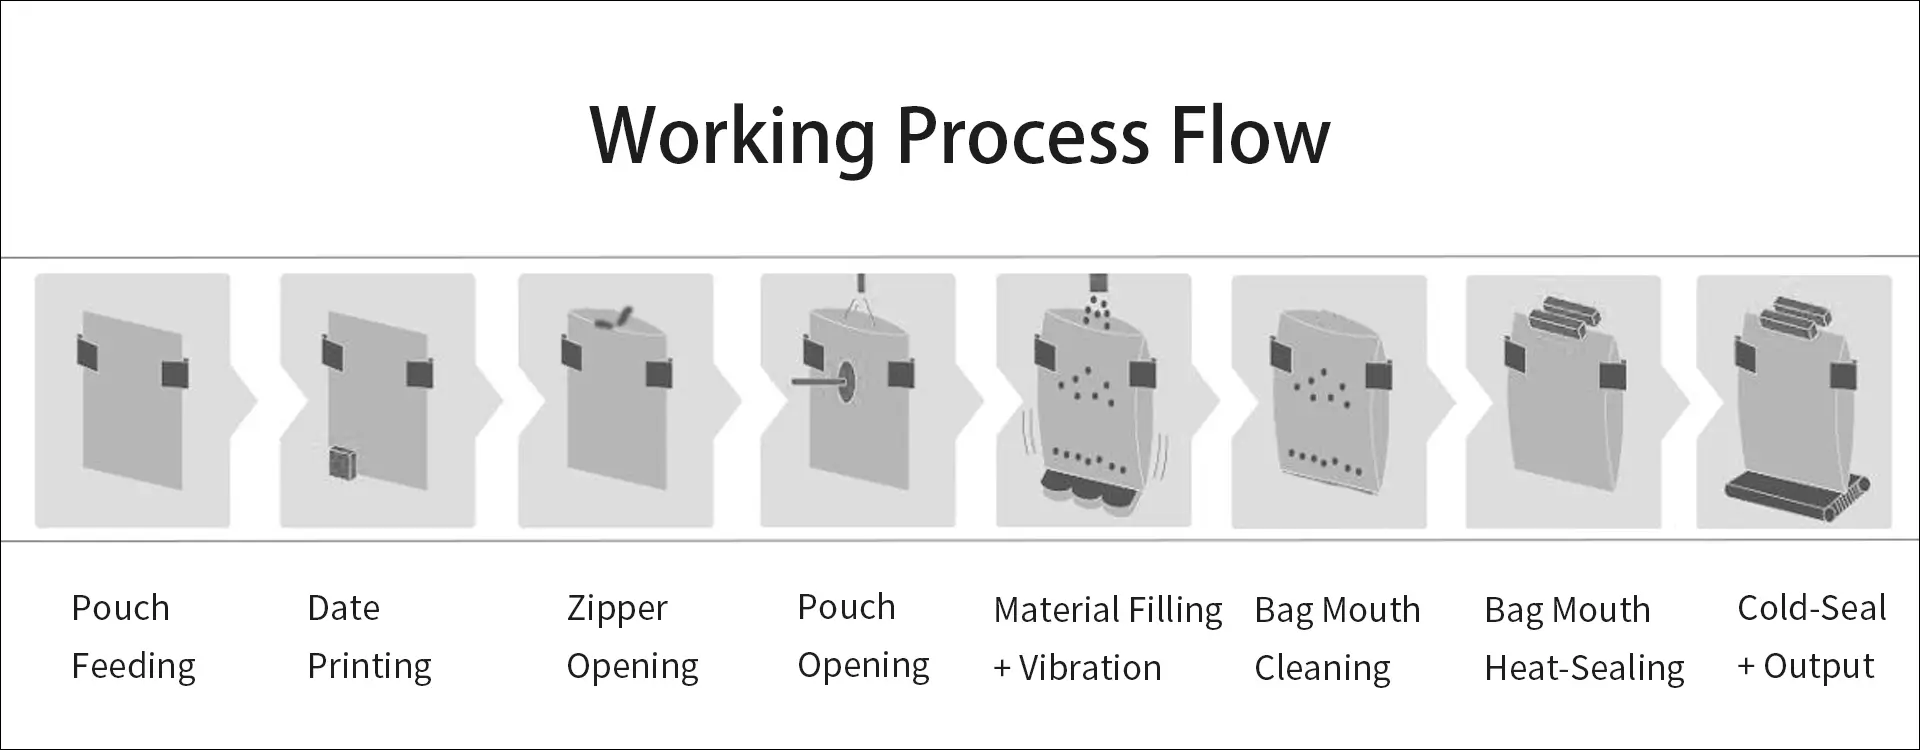 Model SP8-240G Automatic Granule Rotary Packaging Machine Solution Working Process Flow | Solution-Pack